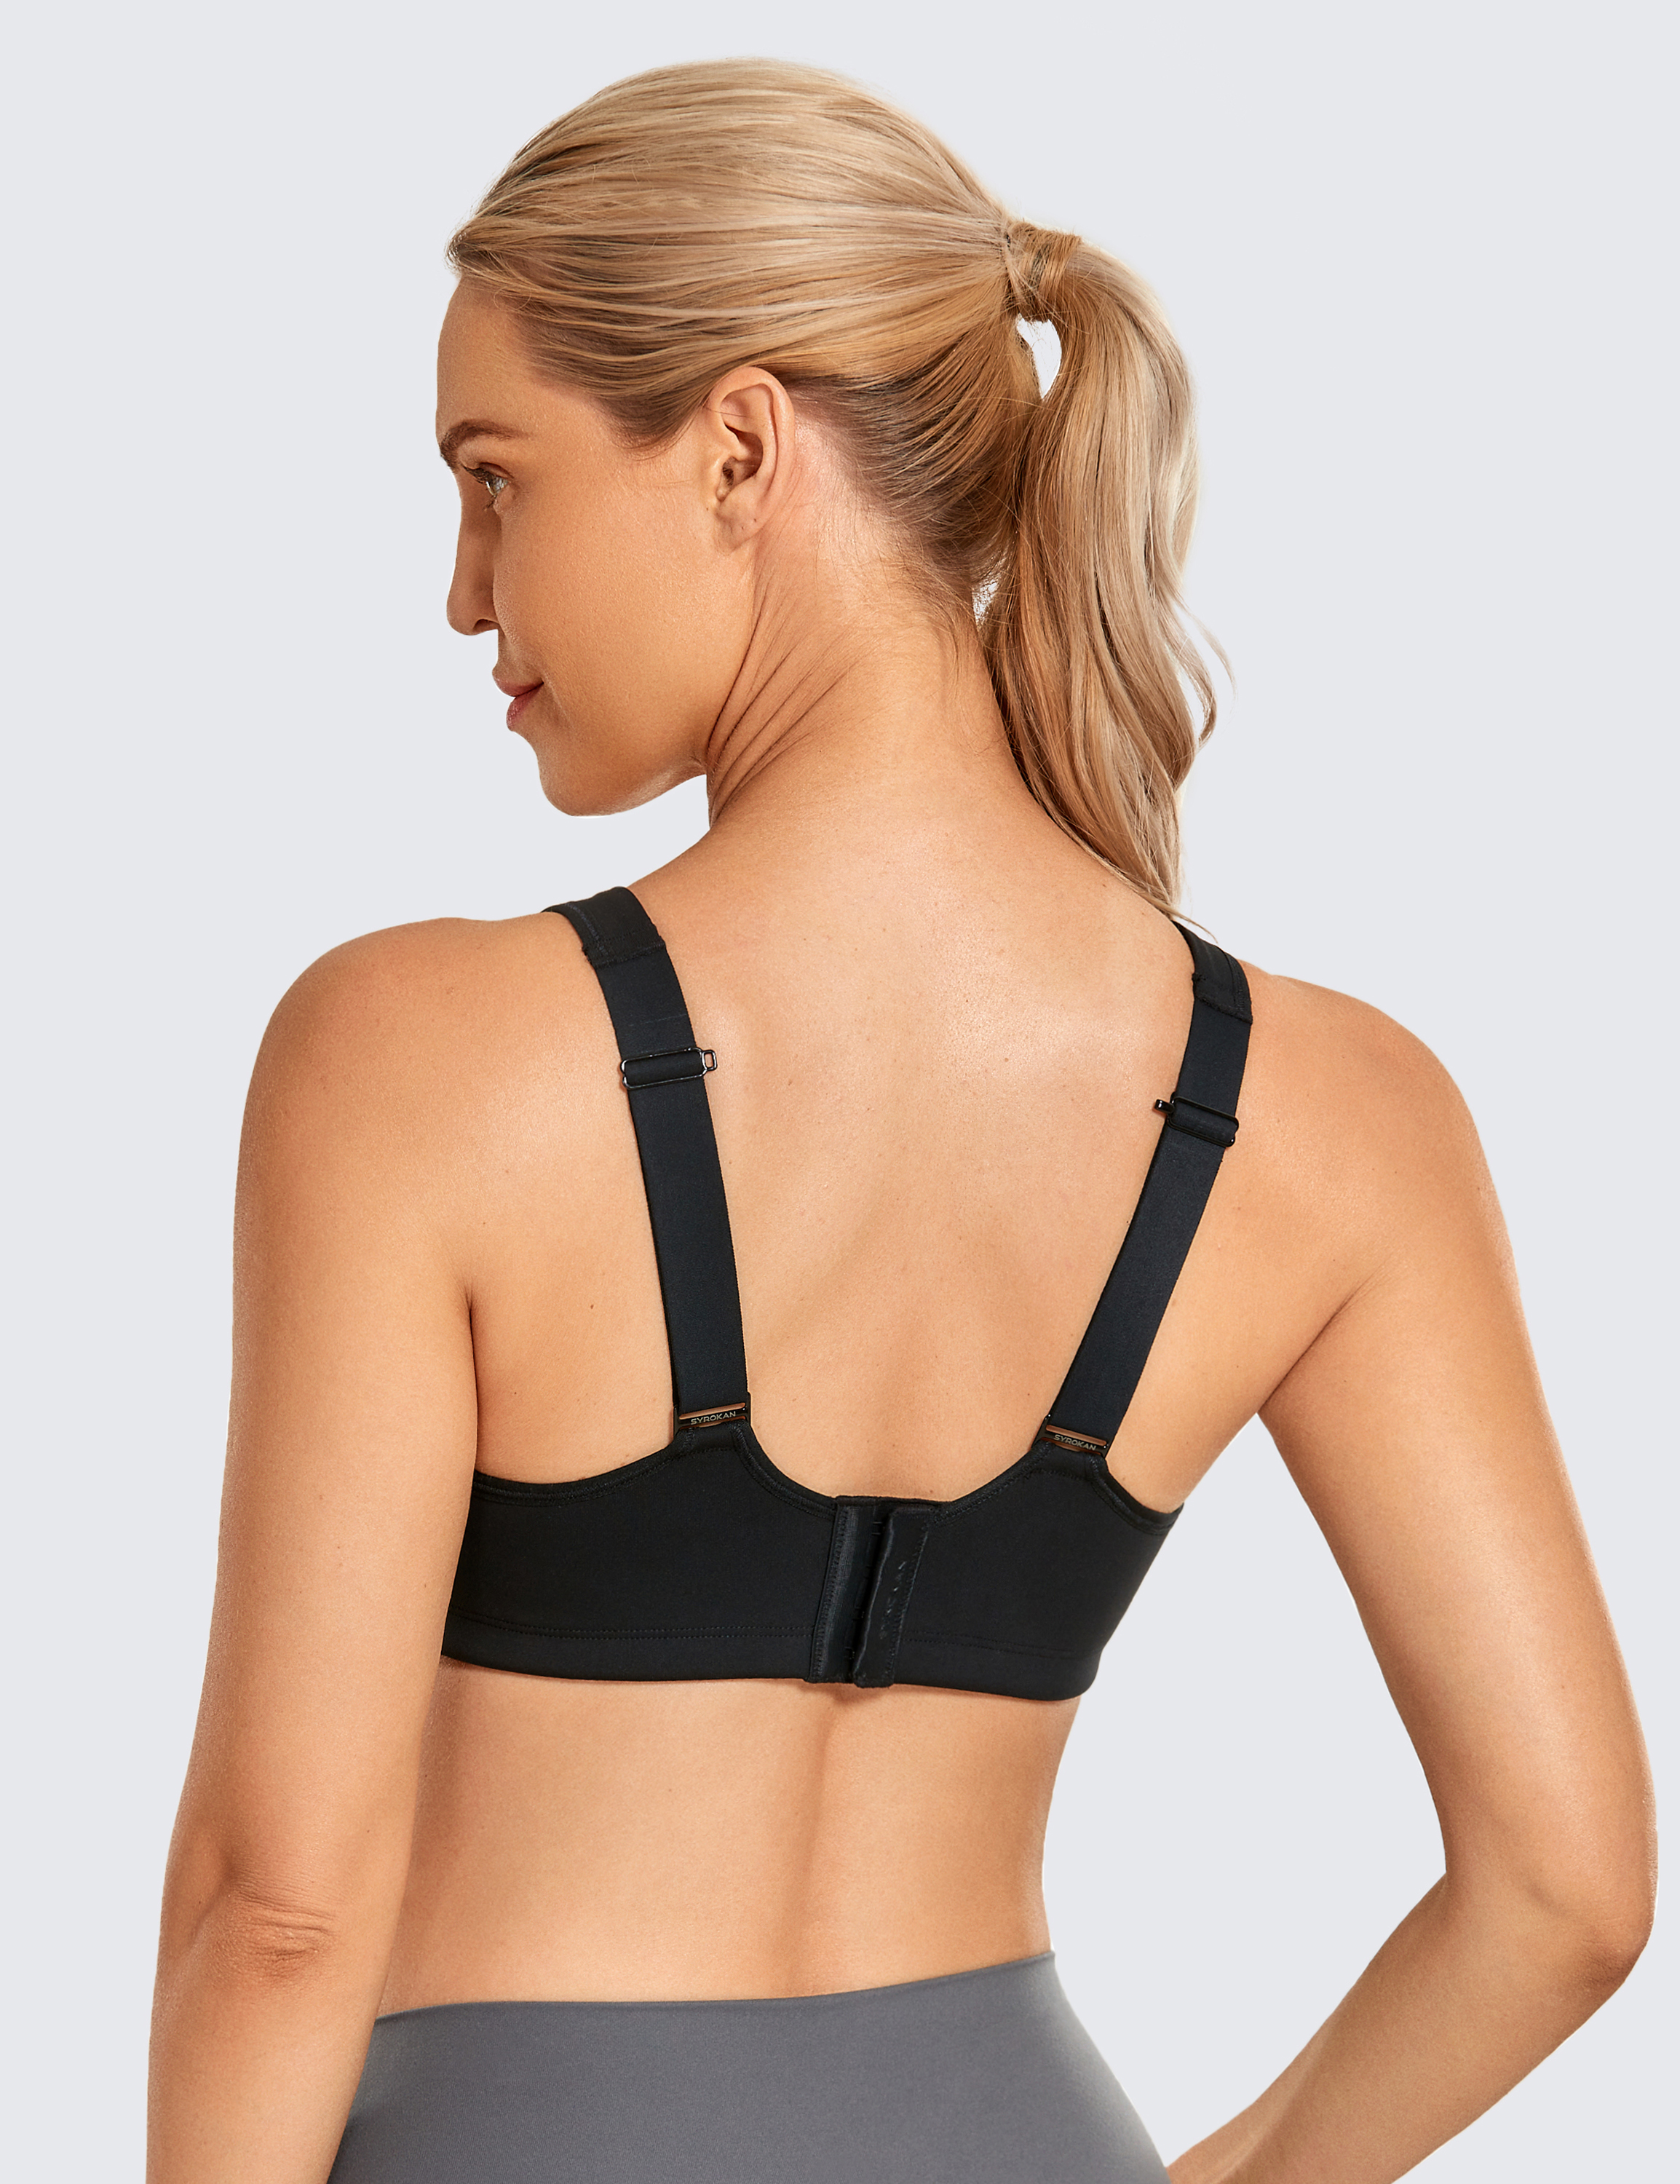 SYROKAN High Impact Sports Bras for Women High Support Underwire